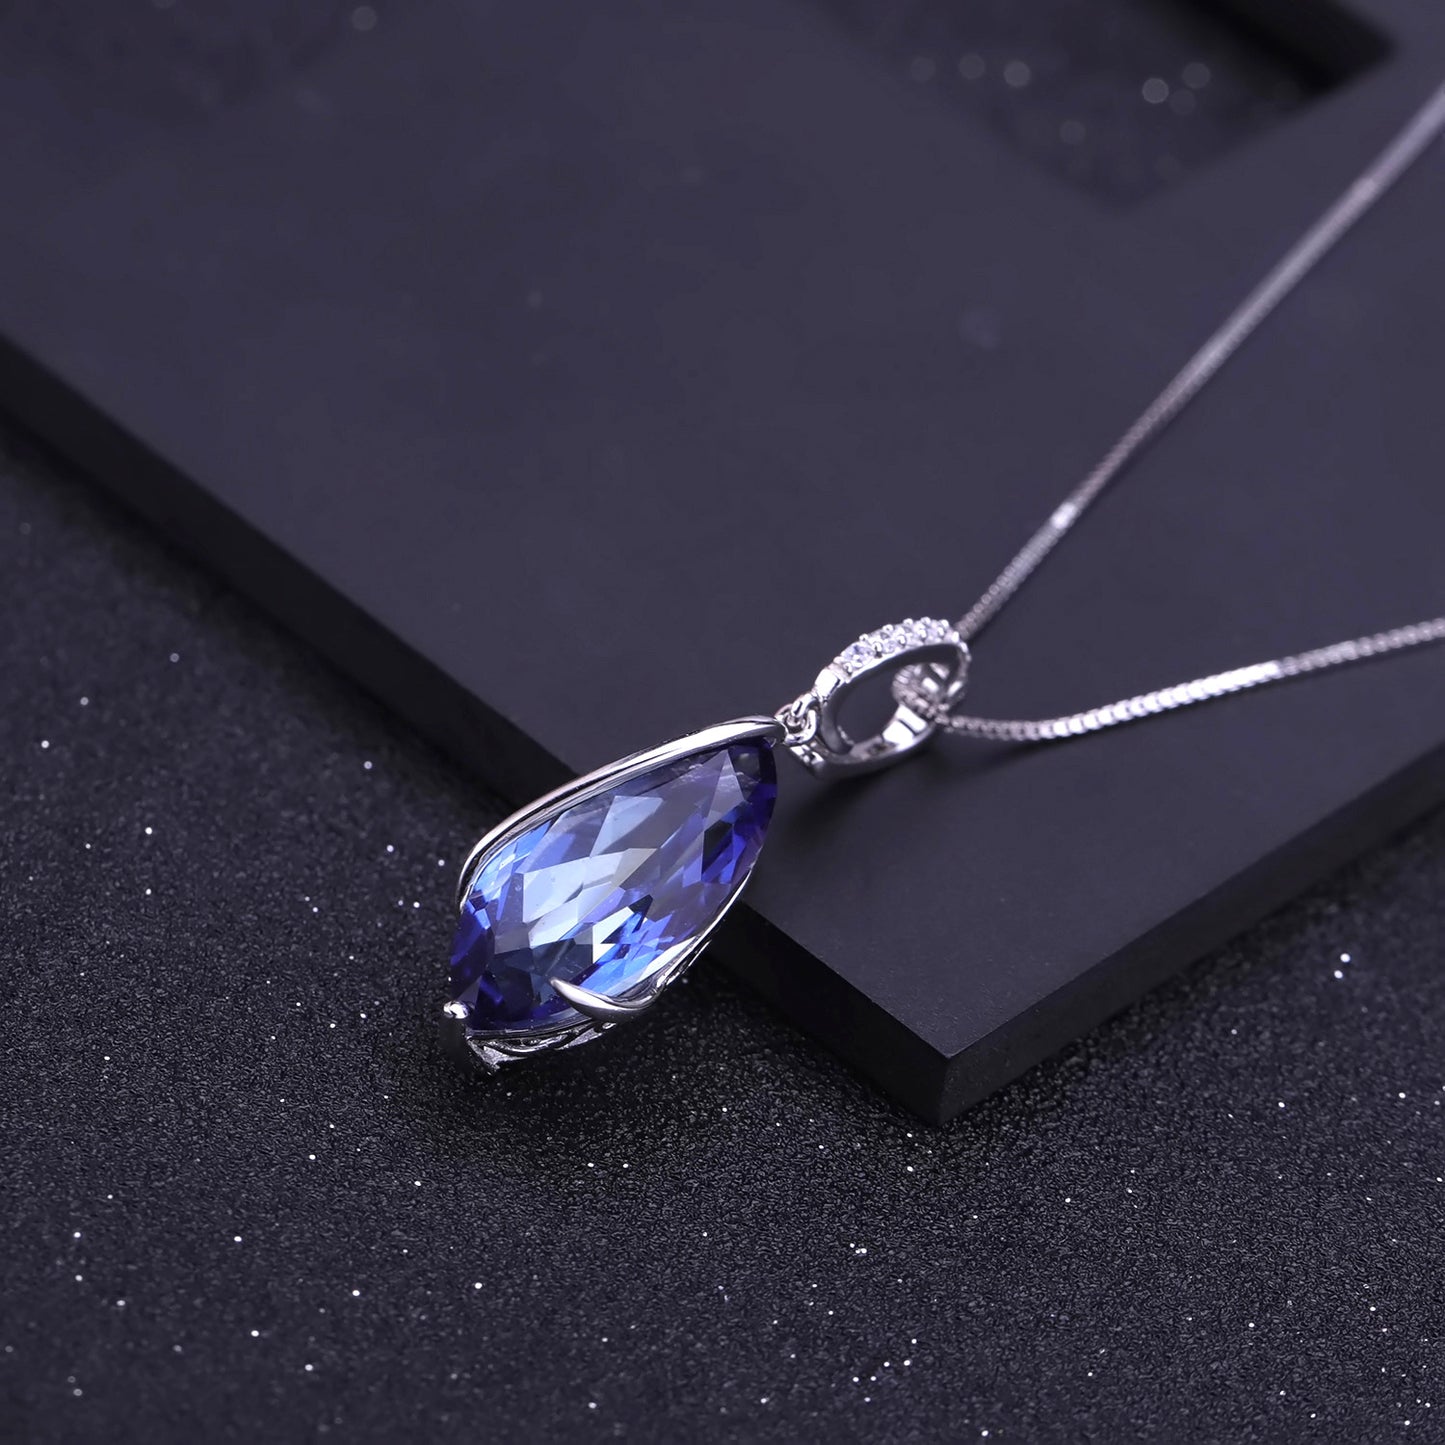 Luxury Retro Fashion Design Inlaid Natural Crystal Pendant Silver Necklace for Women